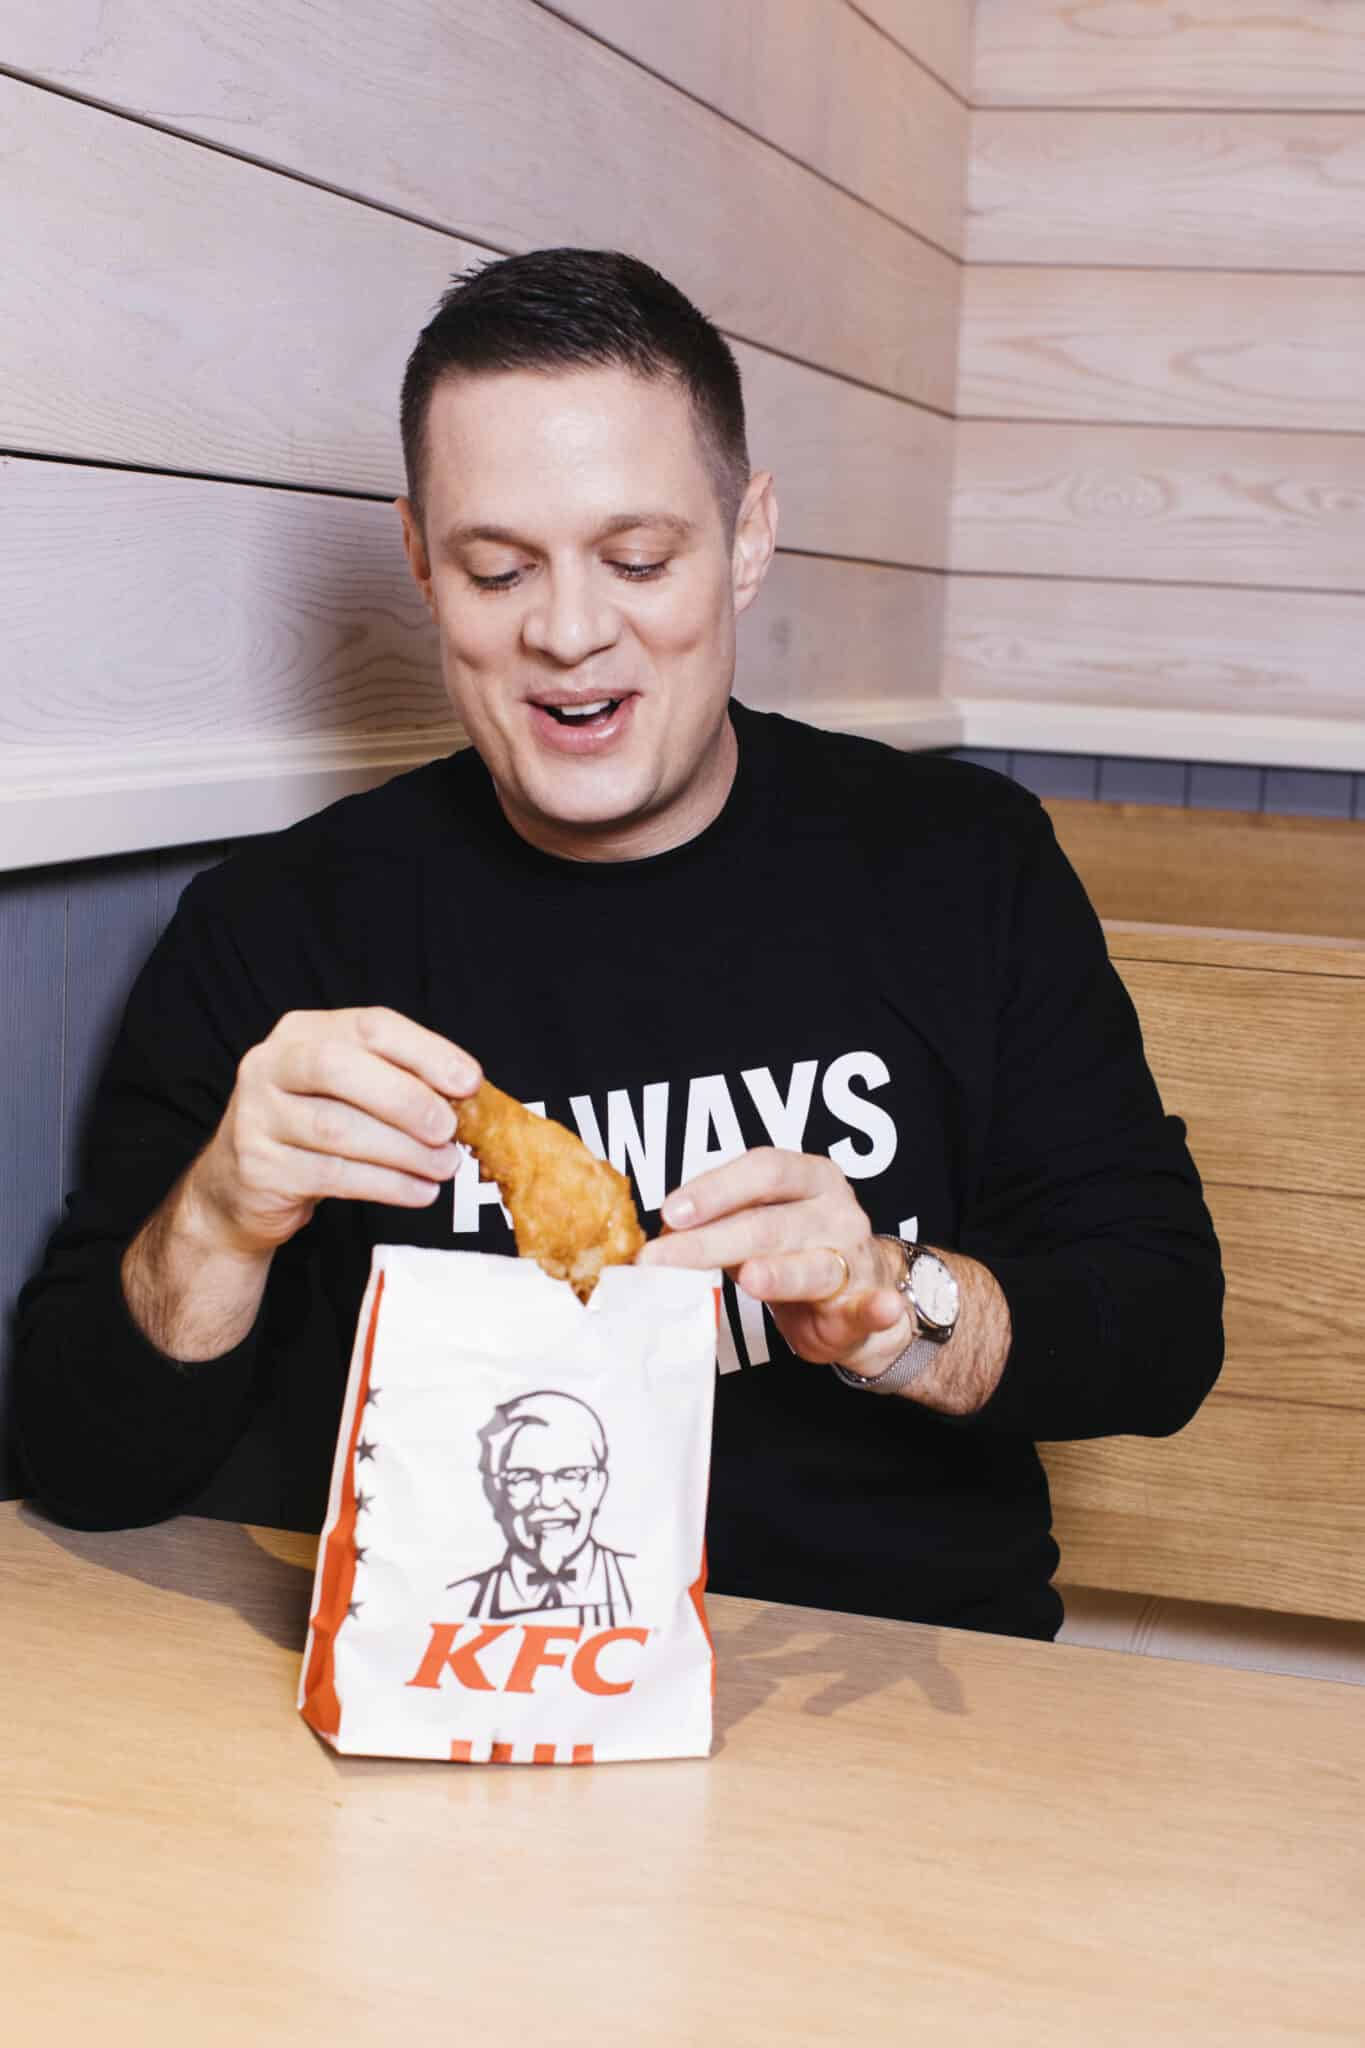 KFC boss Neil Piper pictured eating fried chicken from a KFC bag.